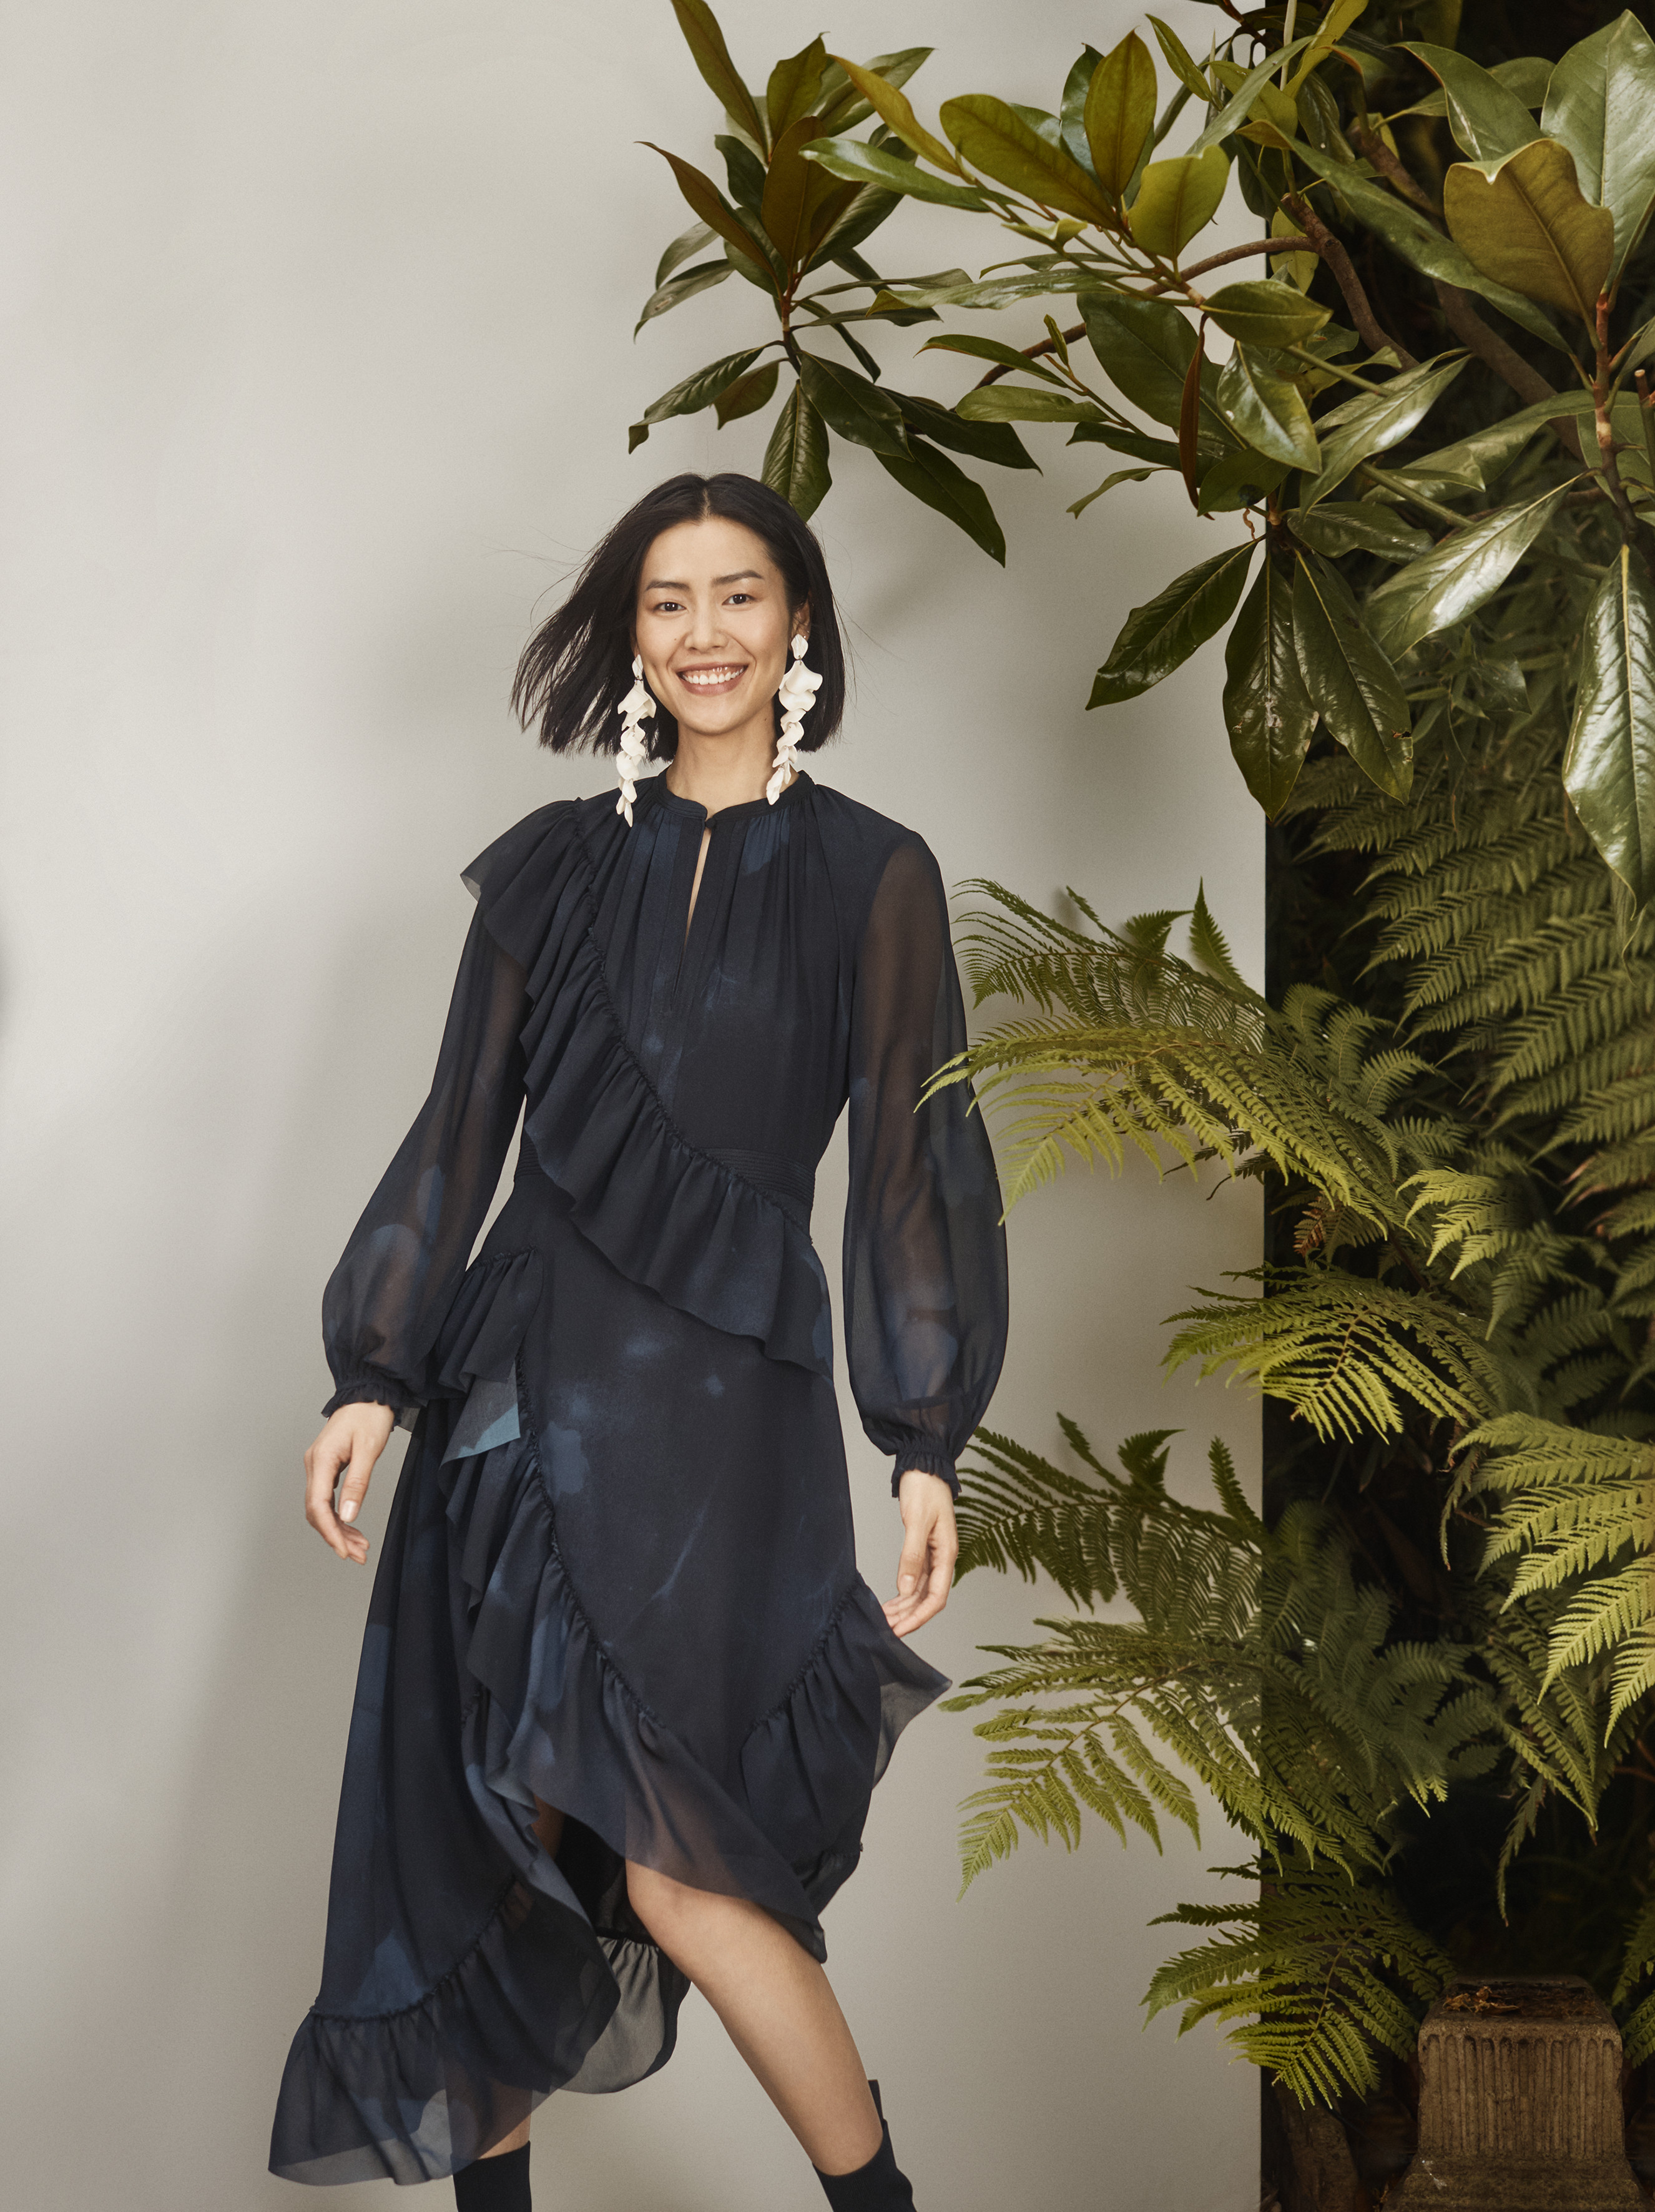 H&M Conscious Exclusive A/W 2018